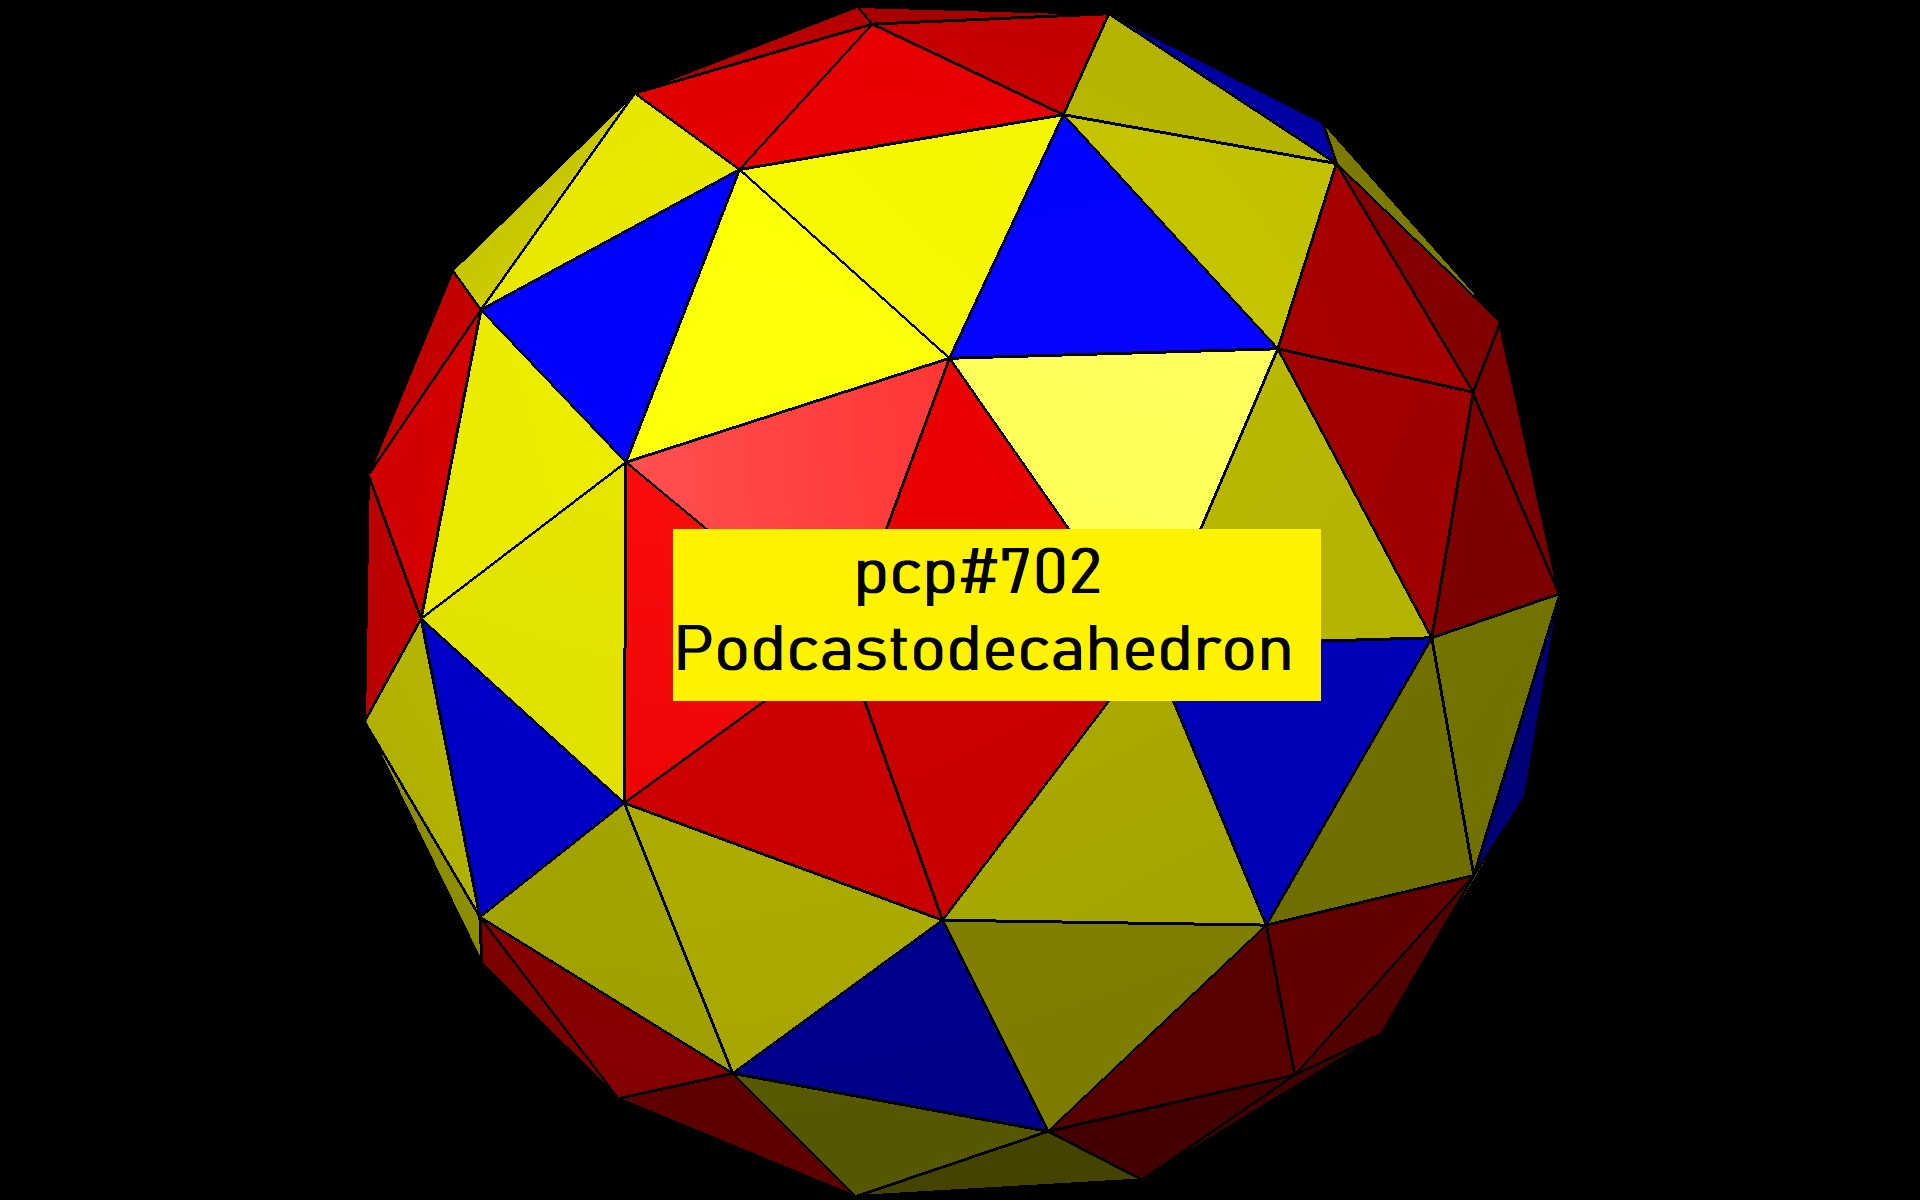 PCP#702... Podcastodecahedron.....